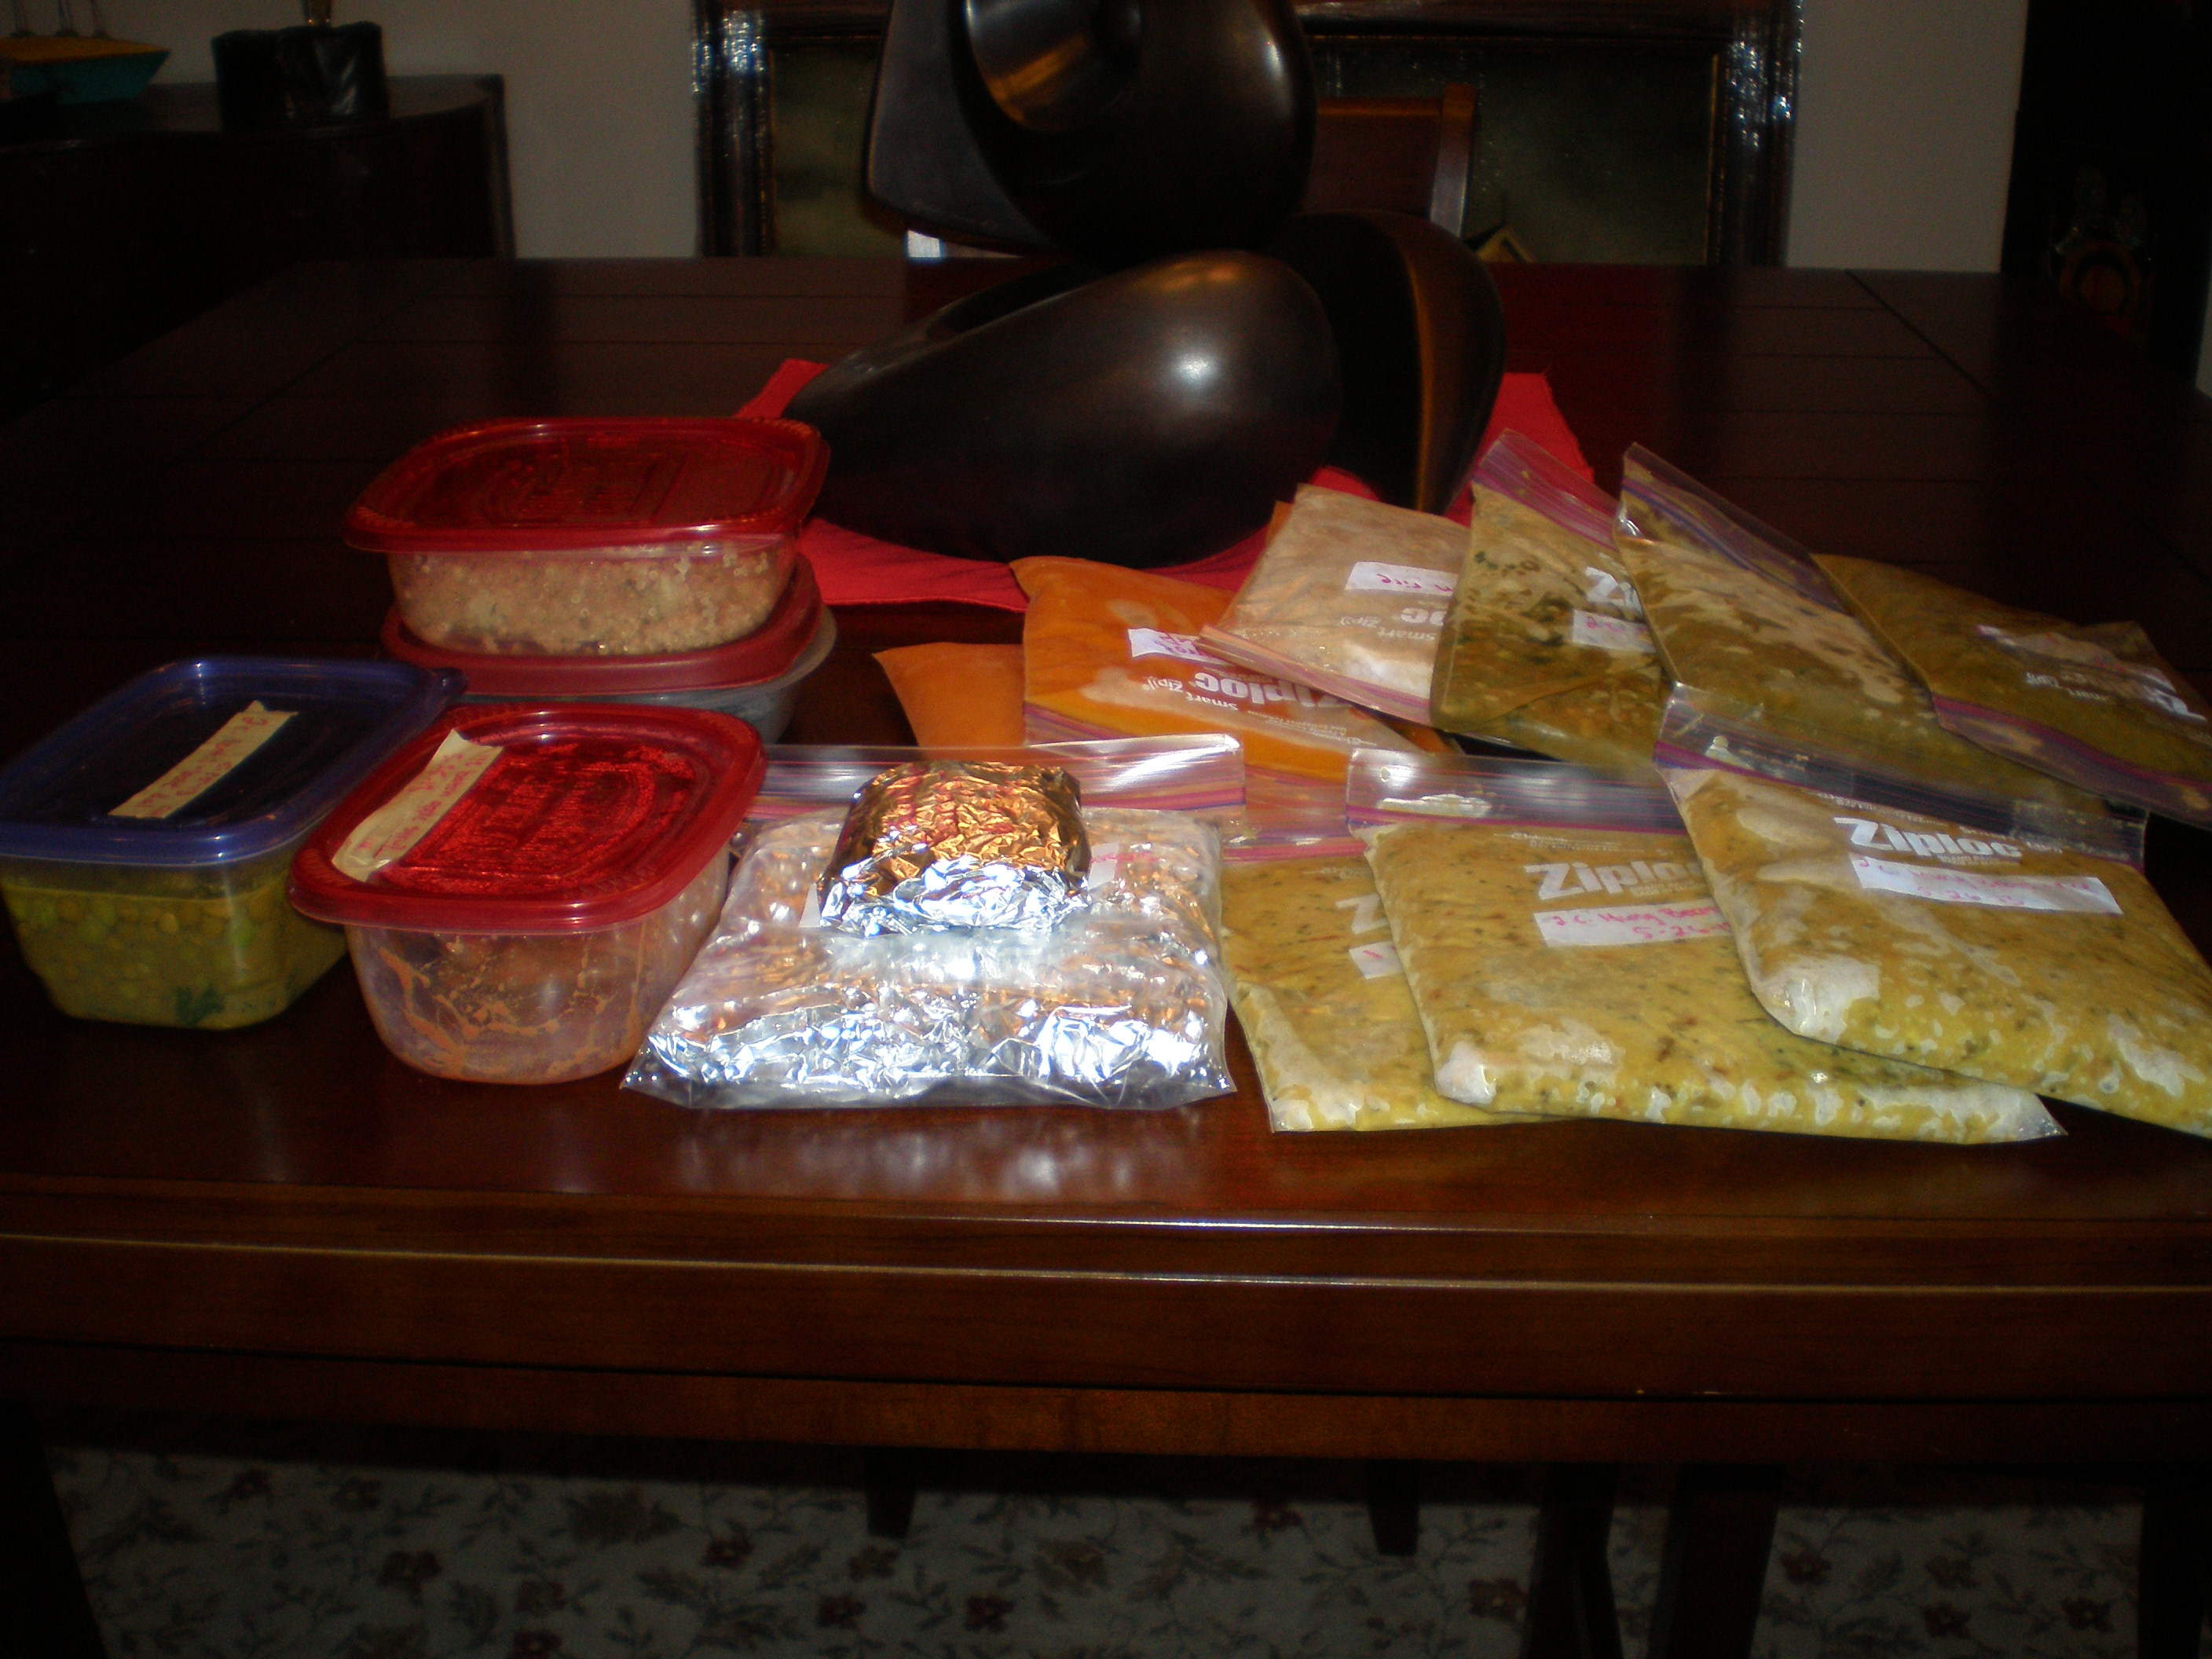 Everything in baggies goes in the freezer, but we need to eat up the tupperware food soon.